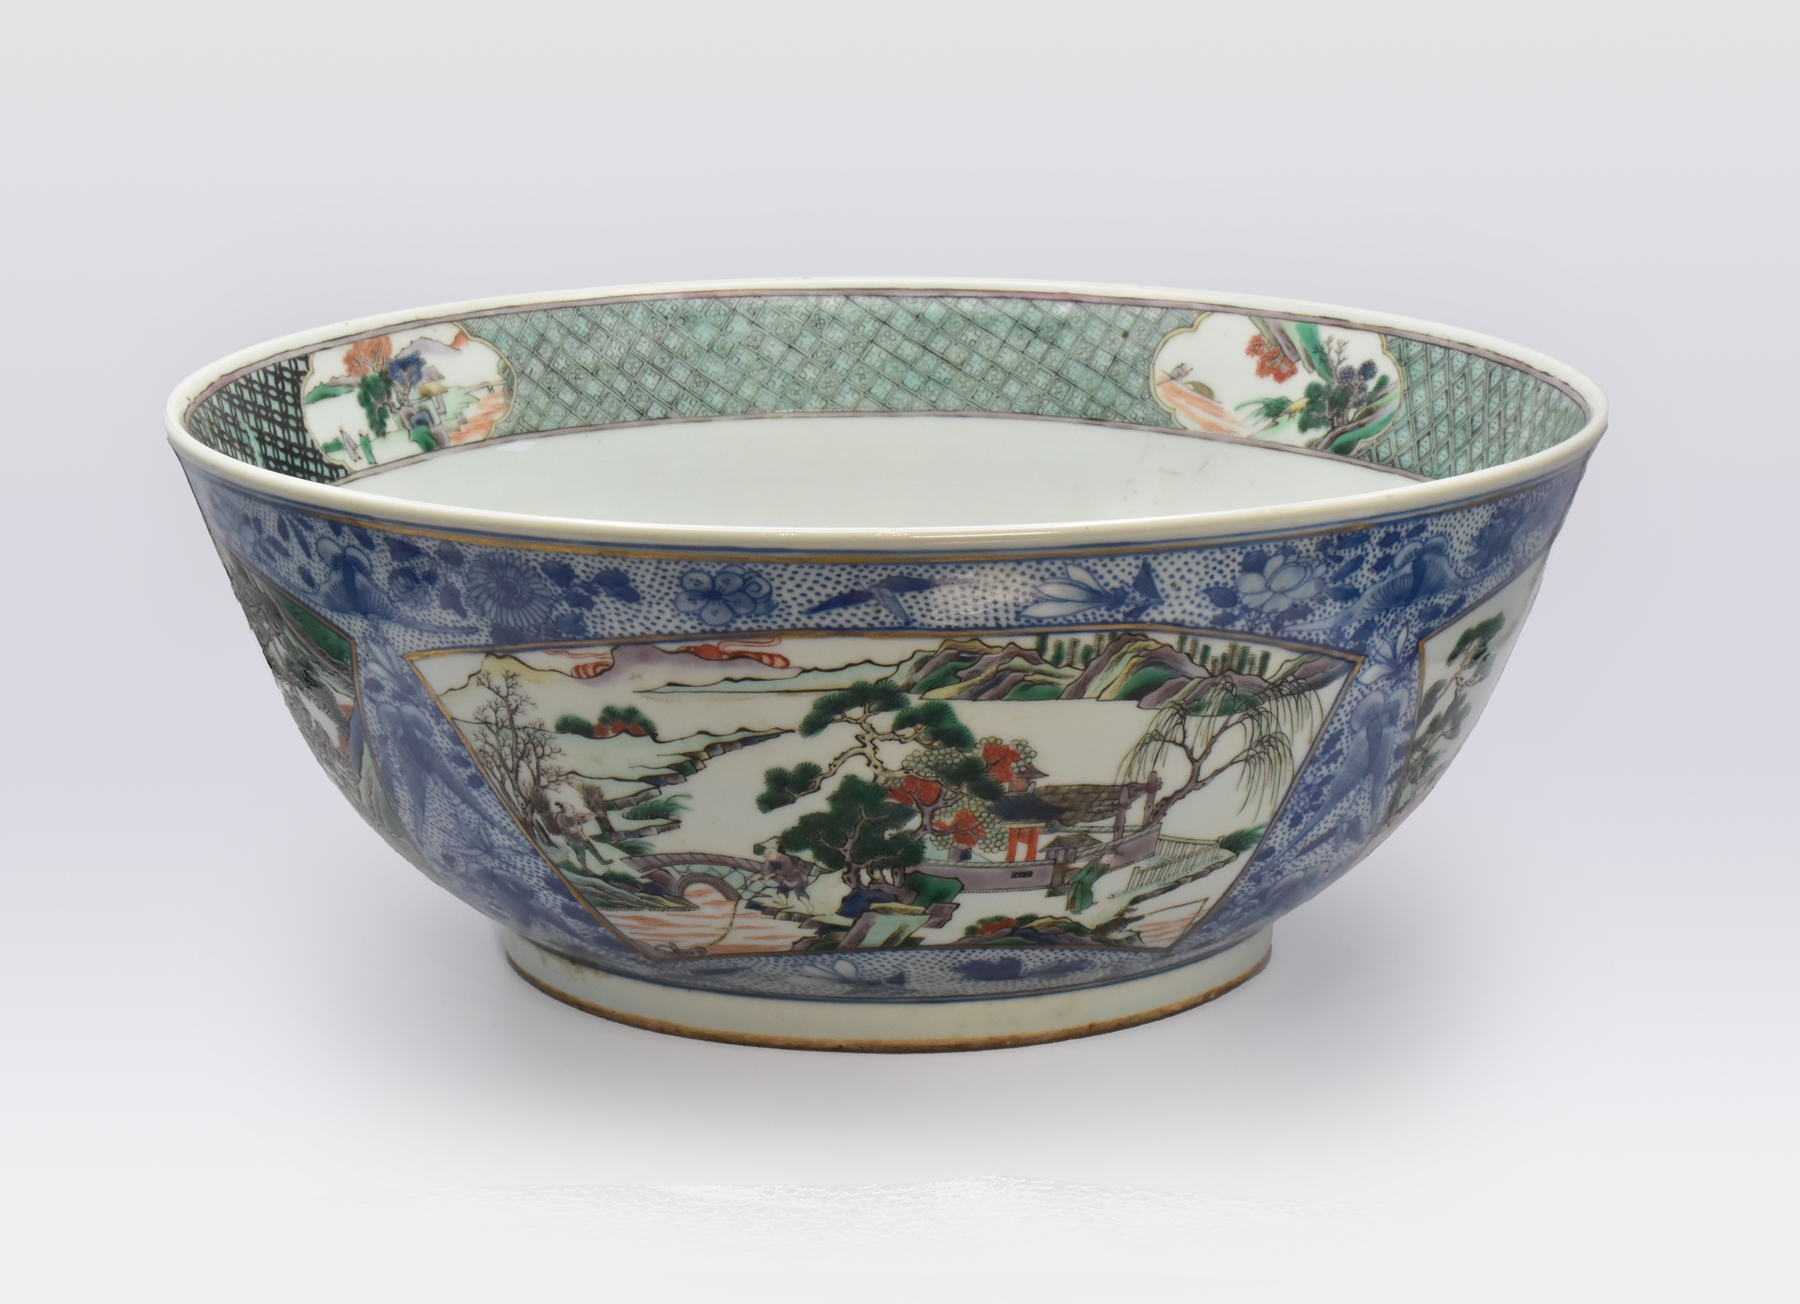 A LARGE CHINESE UNDERGLAZE-BLUE AND 'FAMILLE-VERTE' PUNCHBOWL, QING DYNASTY, 19TH CENTURY - Image 2 of 12